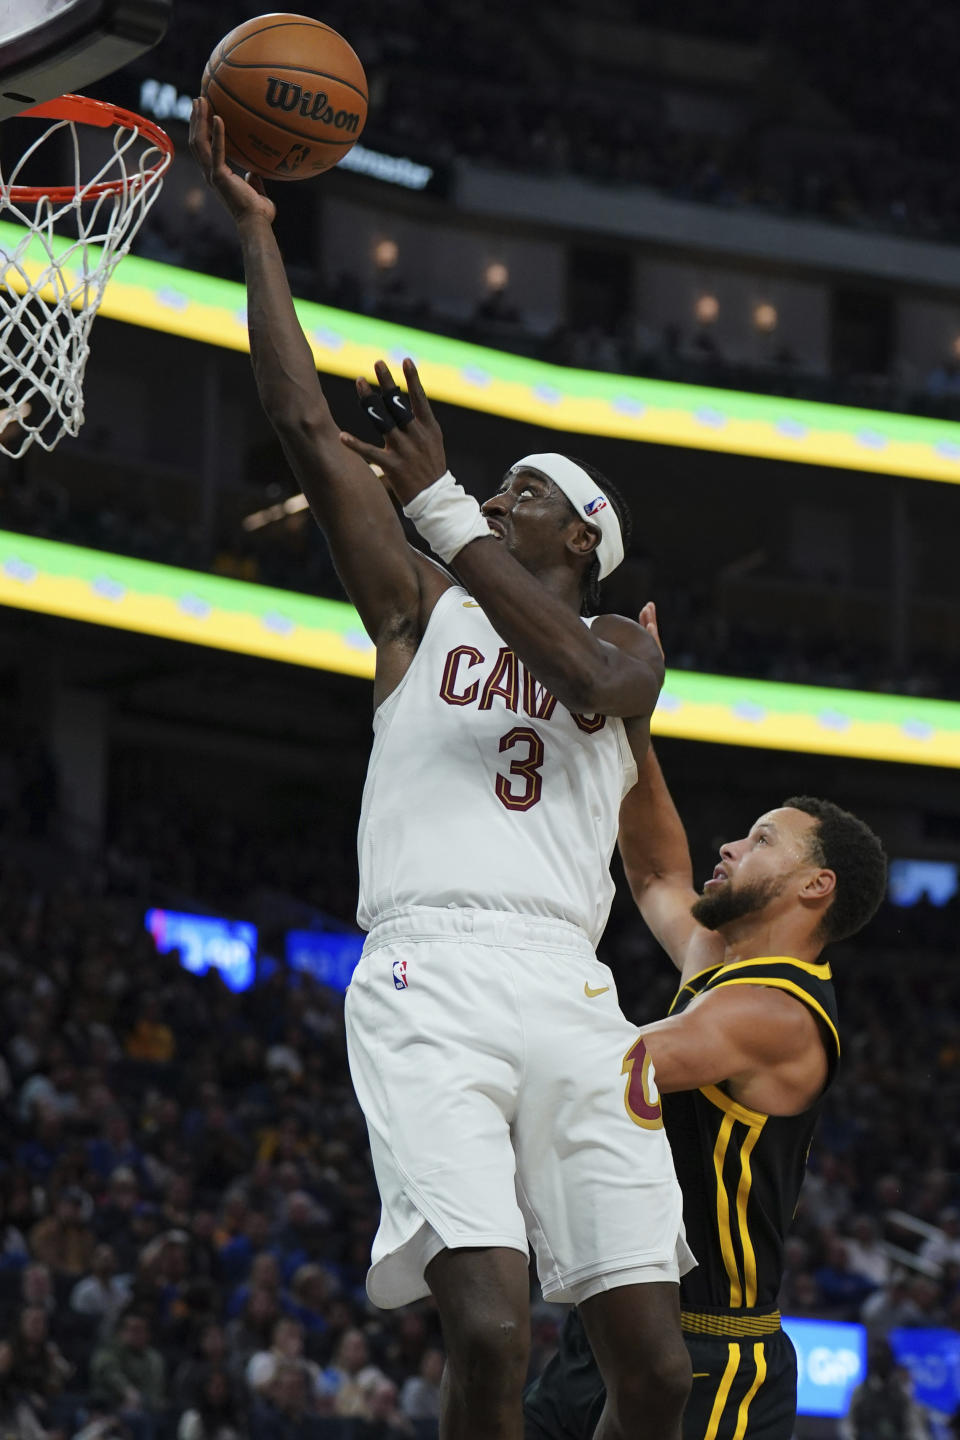 Cleveland Cavaliers guard Caris LeVert (3) drives to the basket as Golden State Warriors guard Stephen Curry (30) defends during the first half of an NBA basketball game Saturday, Nov. 11, 2023, in San Francisco. (AP Photo/Loren Elliott)